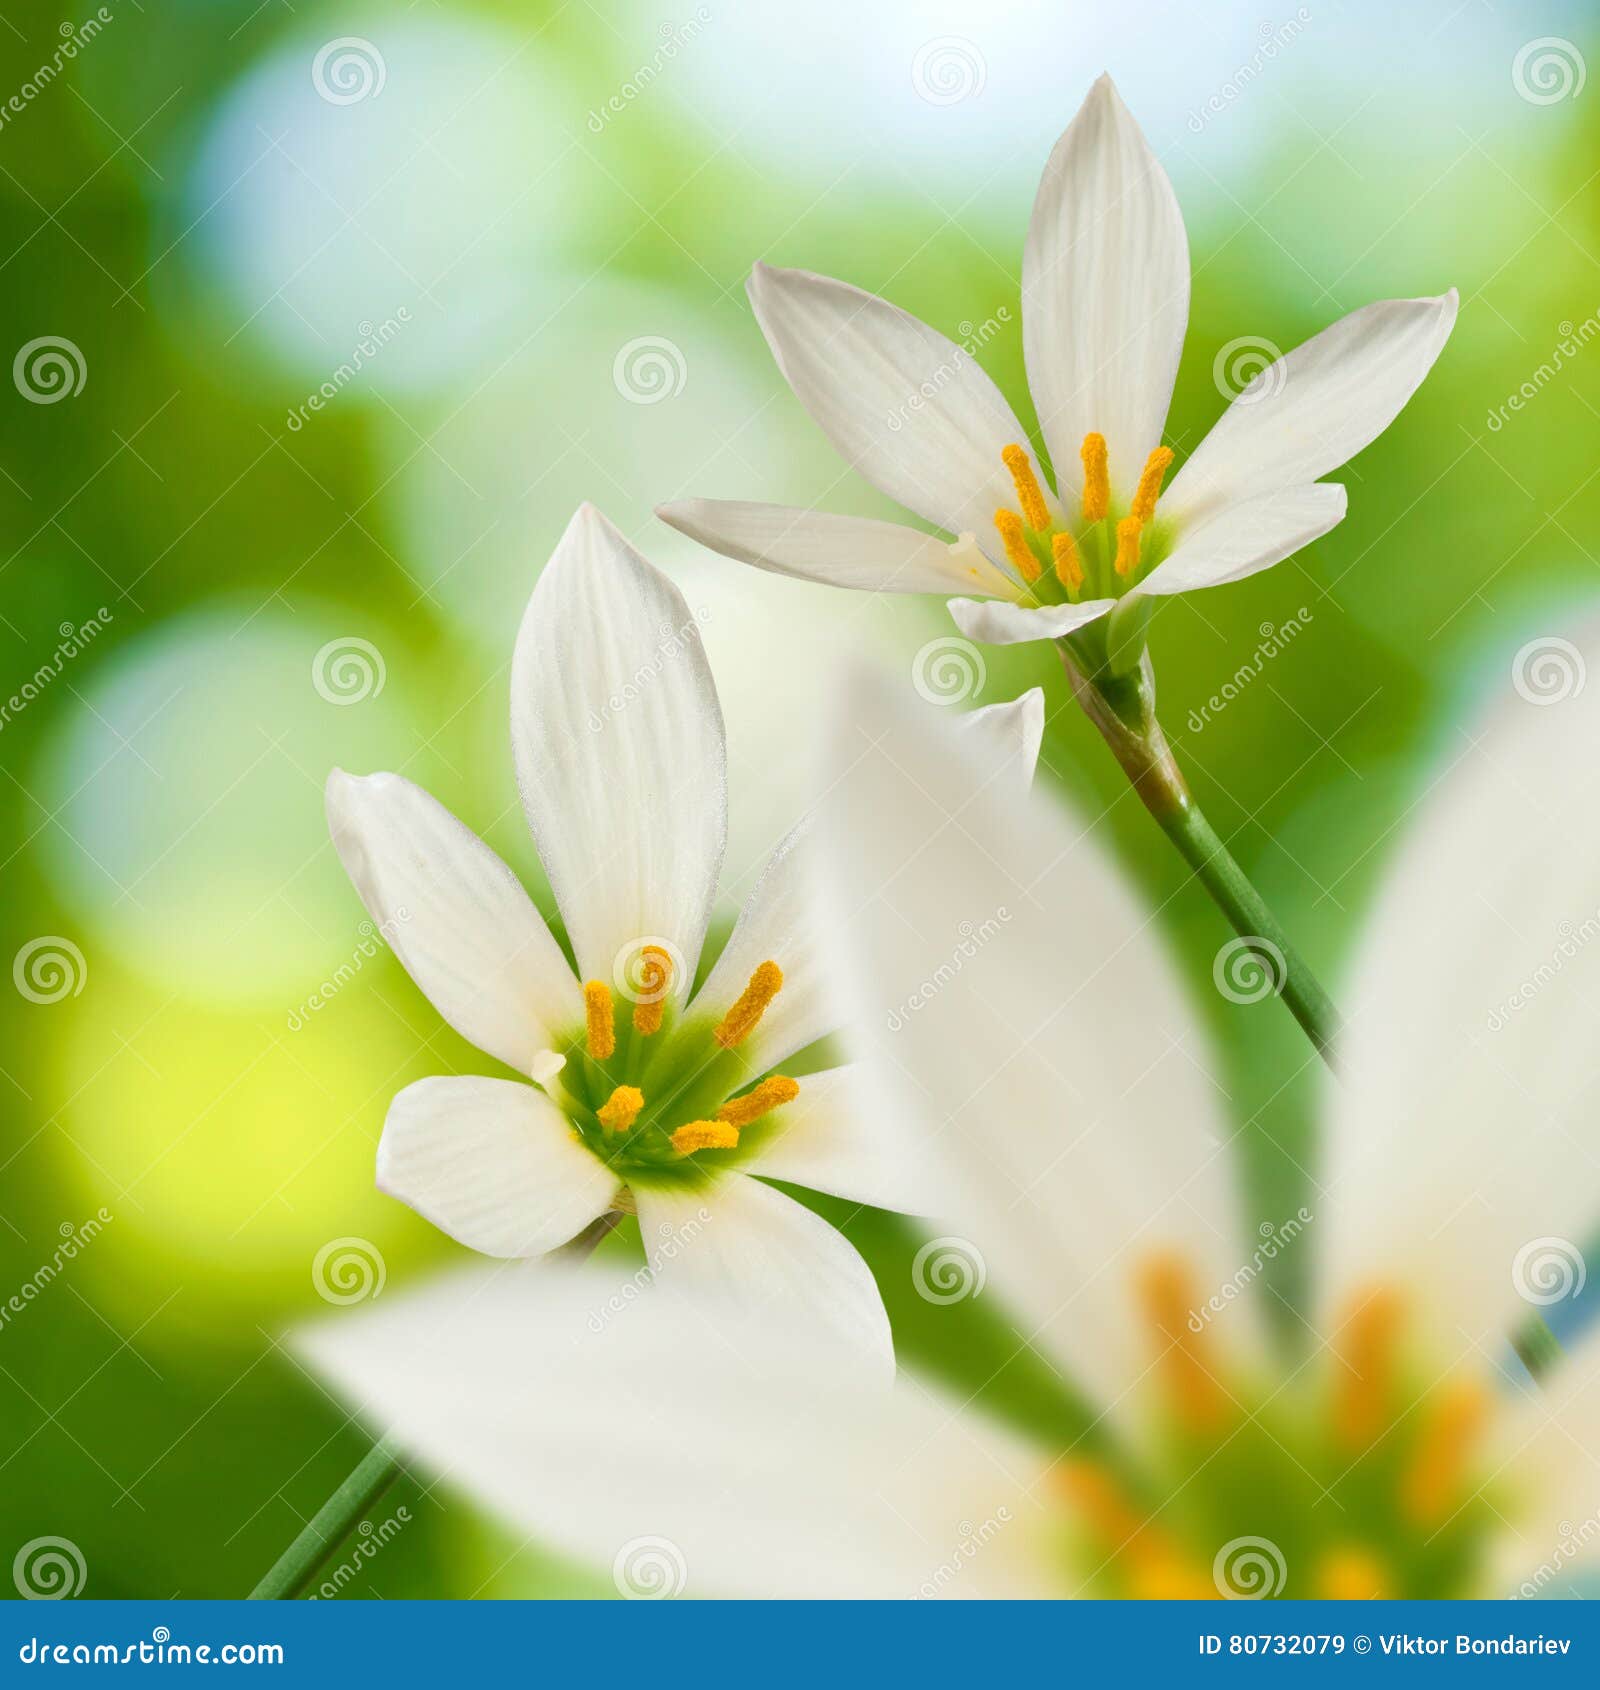 Image of Beautiful White Flower on Green Background Closeup Stock Image ...